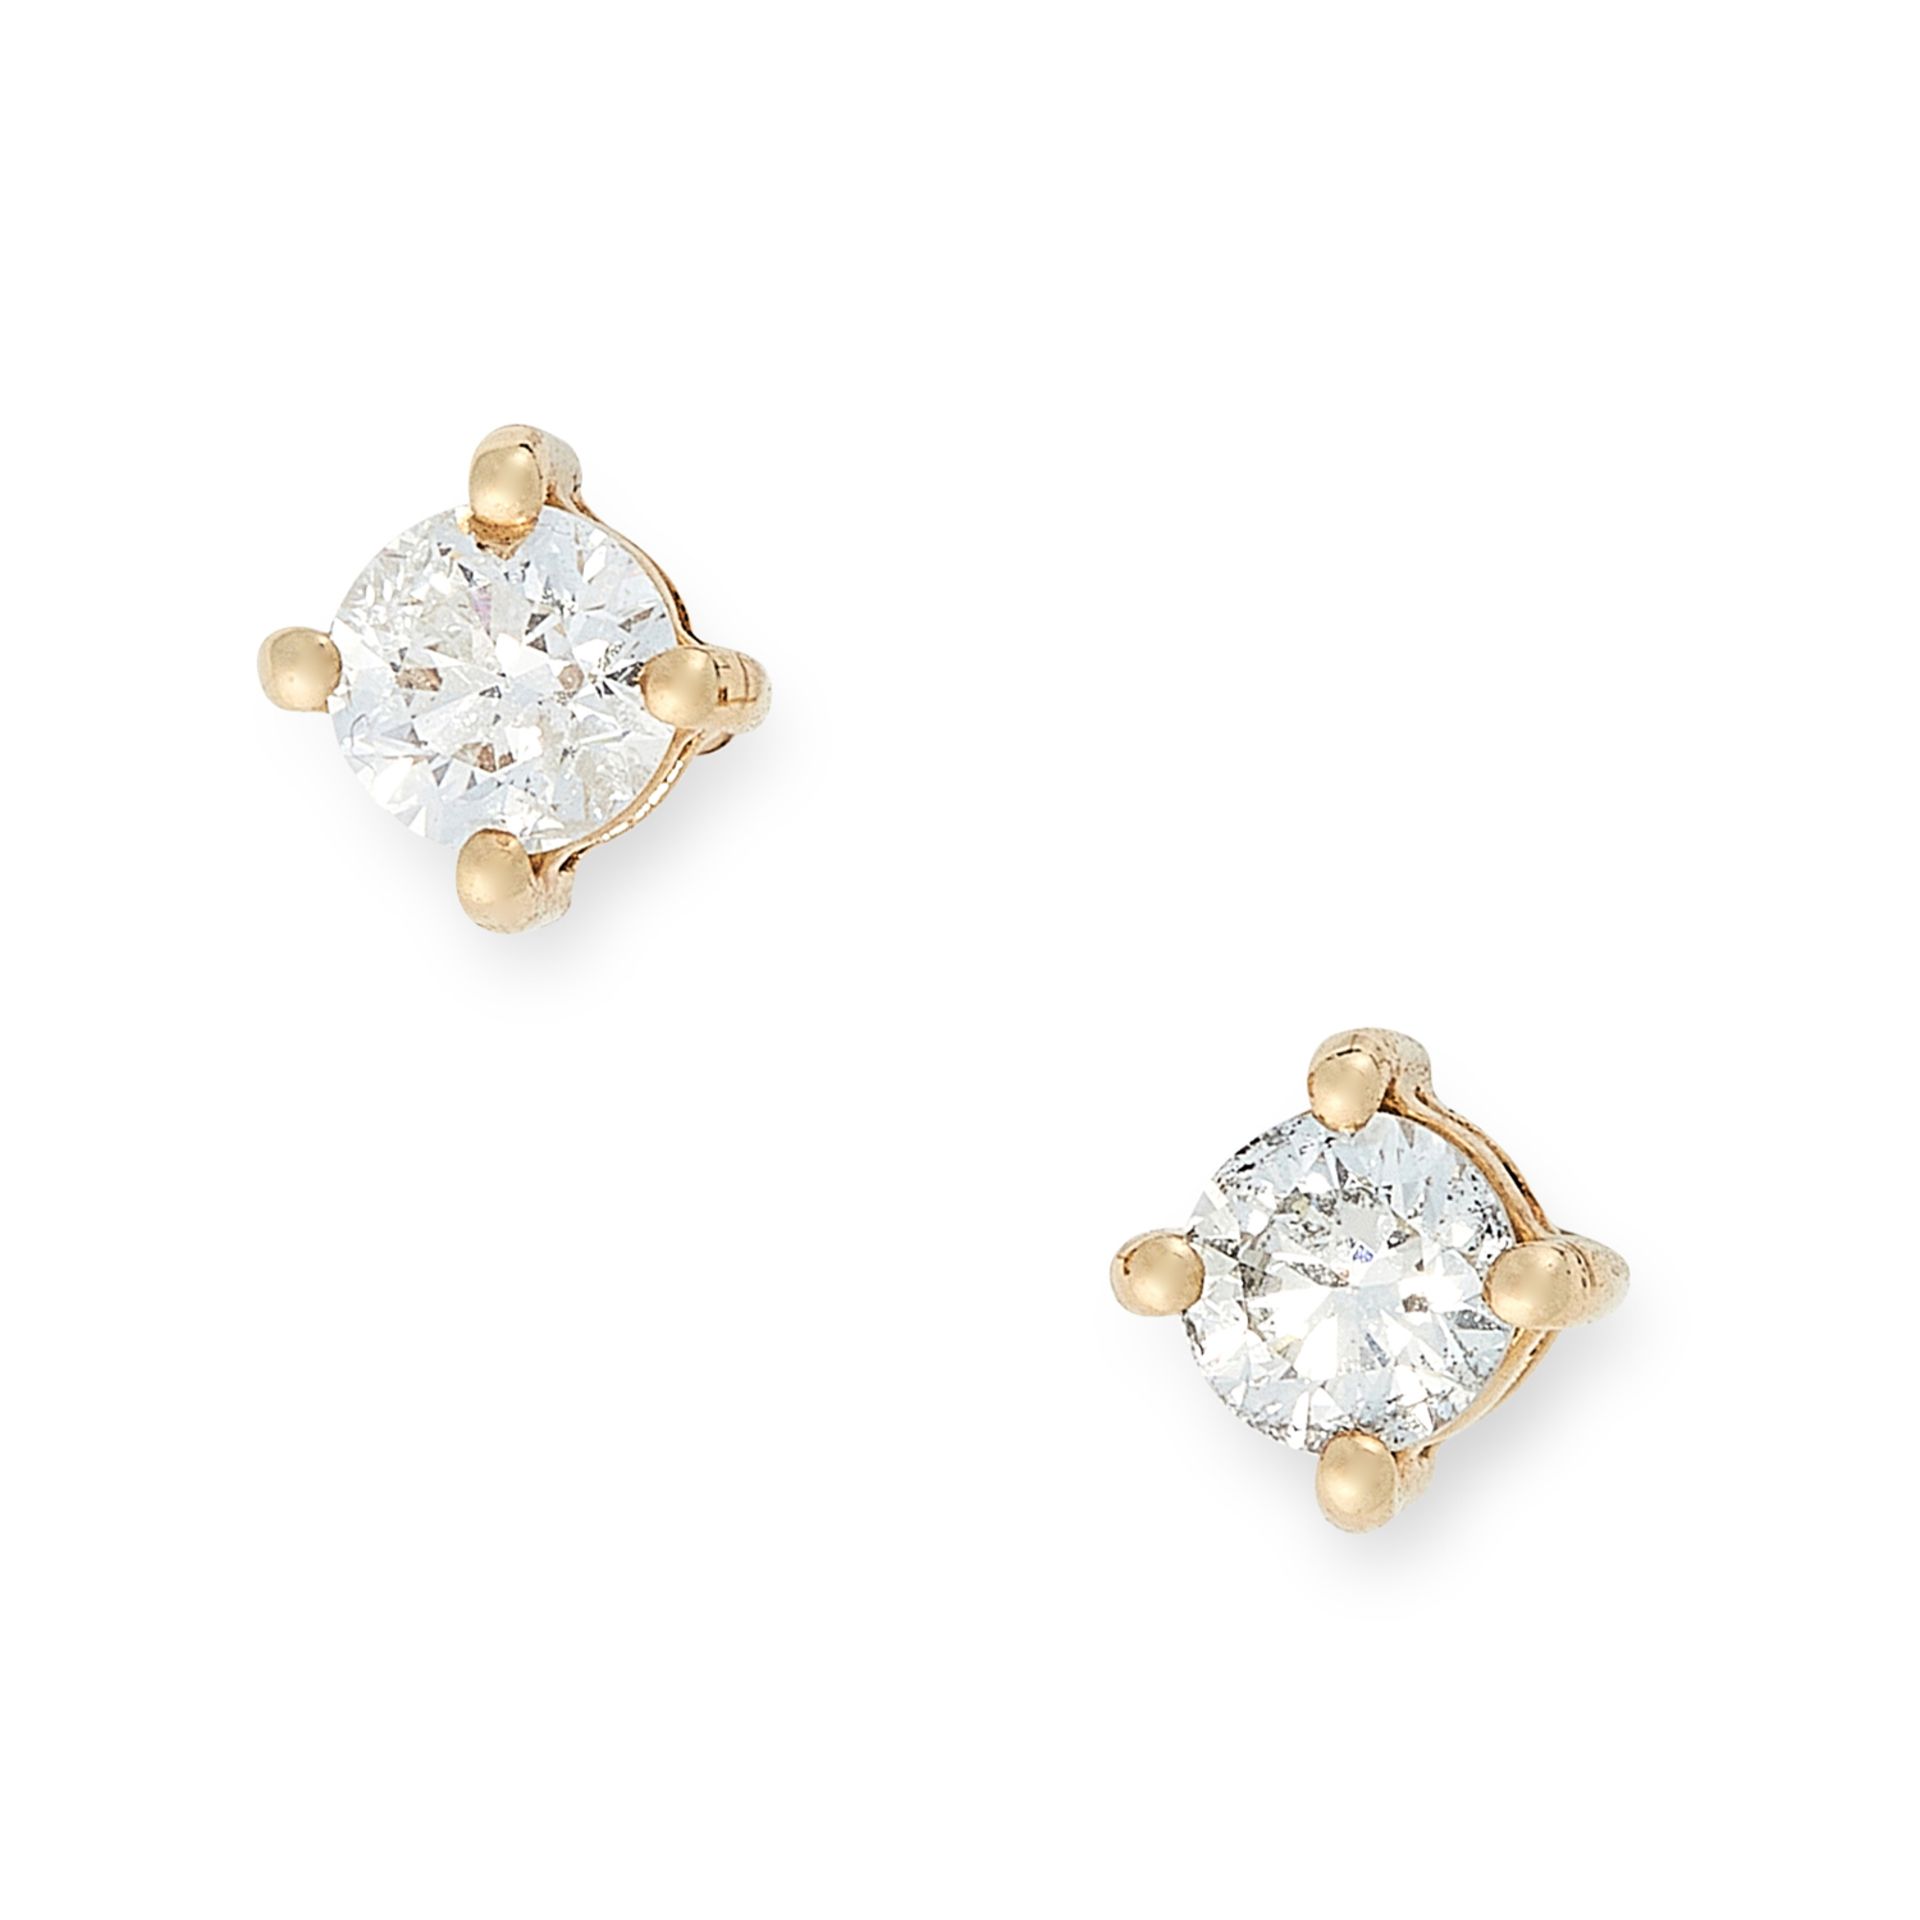 A PAIR OF DIAMOND STUD EARRINGS in 18ct yellow gold, each set with a round cut diamond totalling 0.